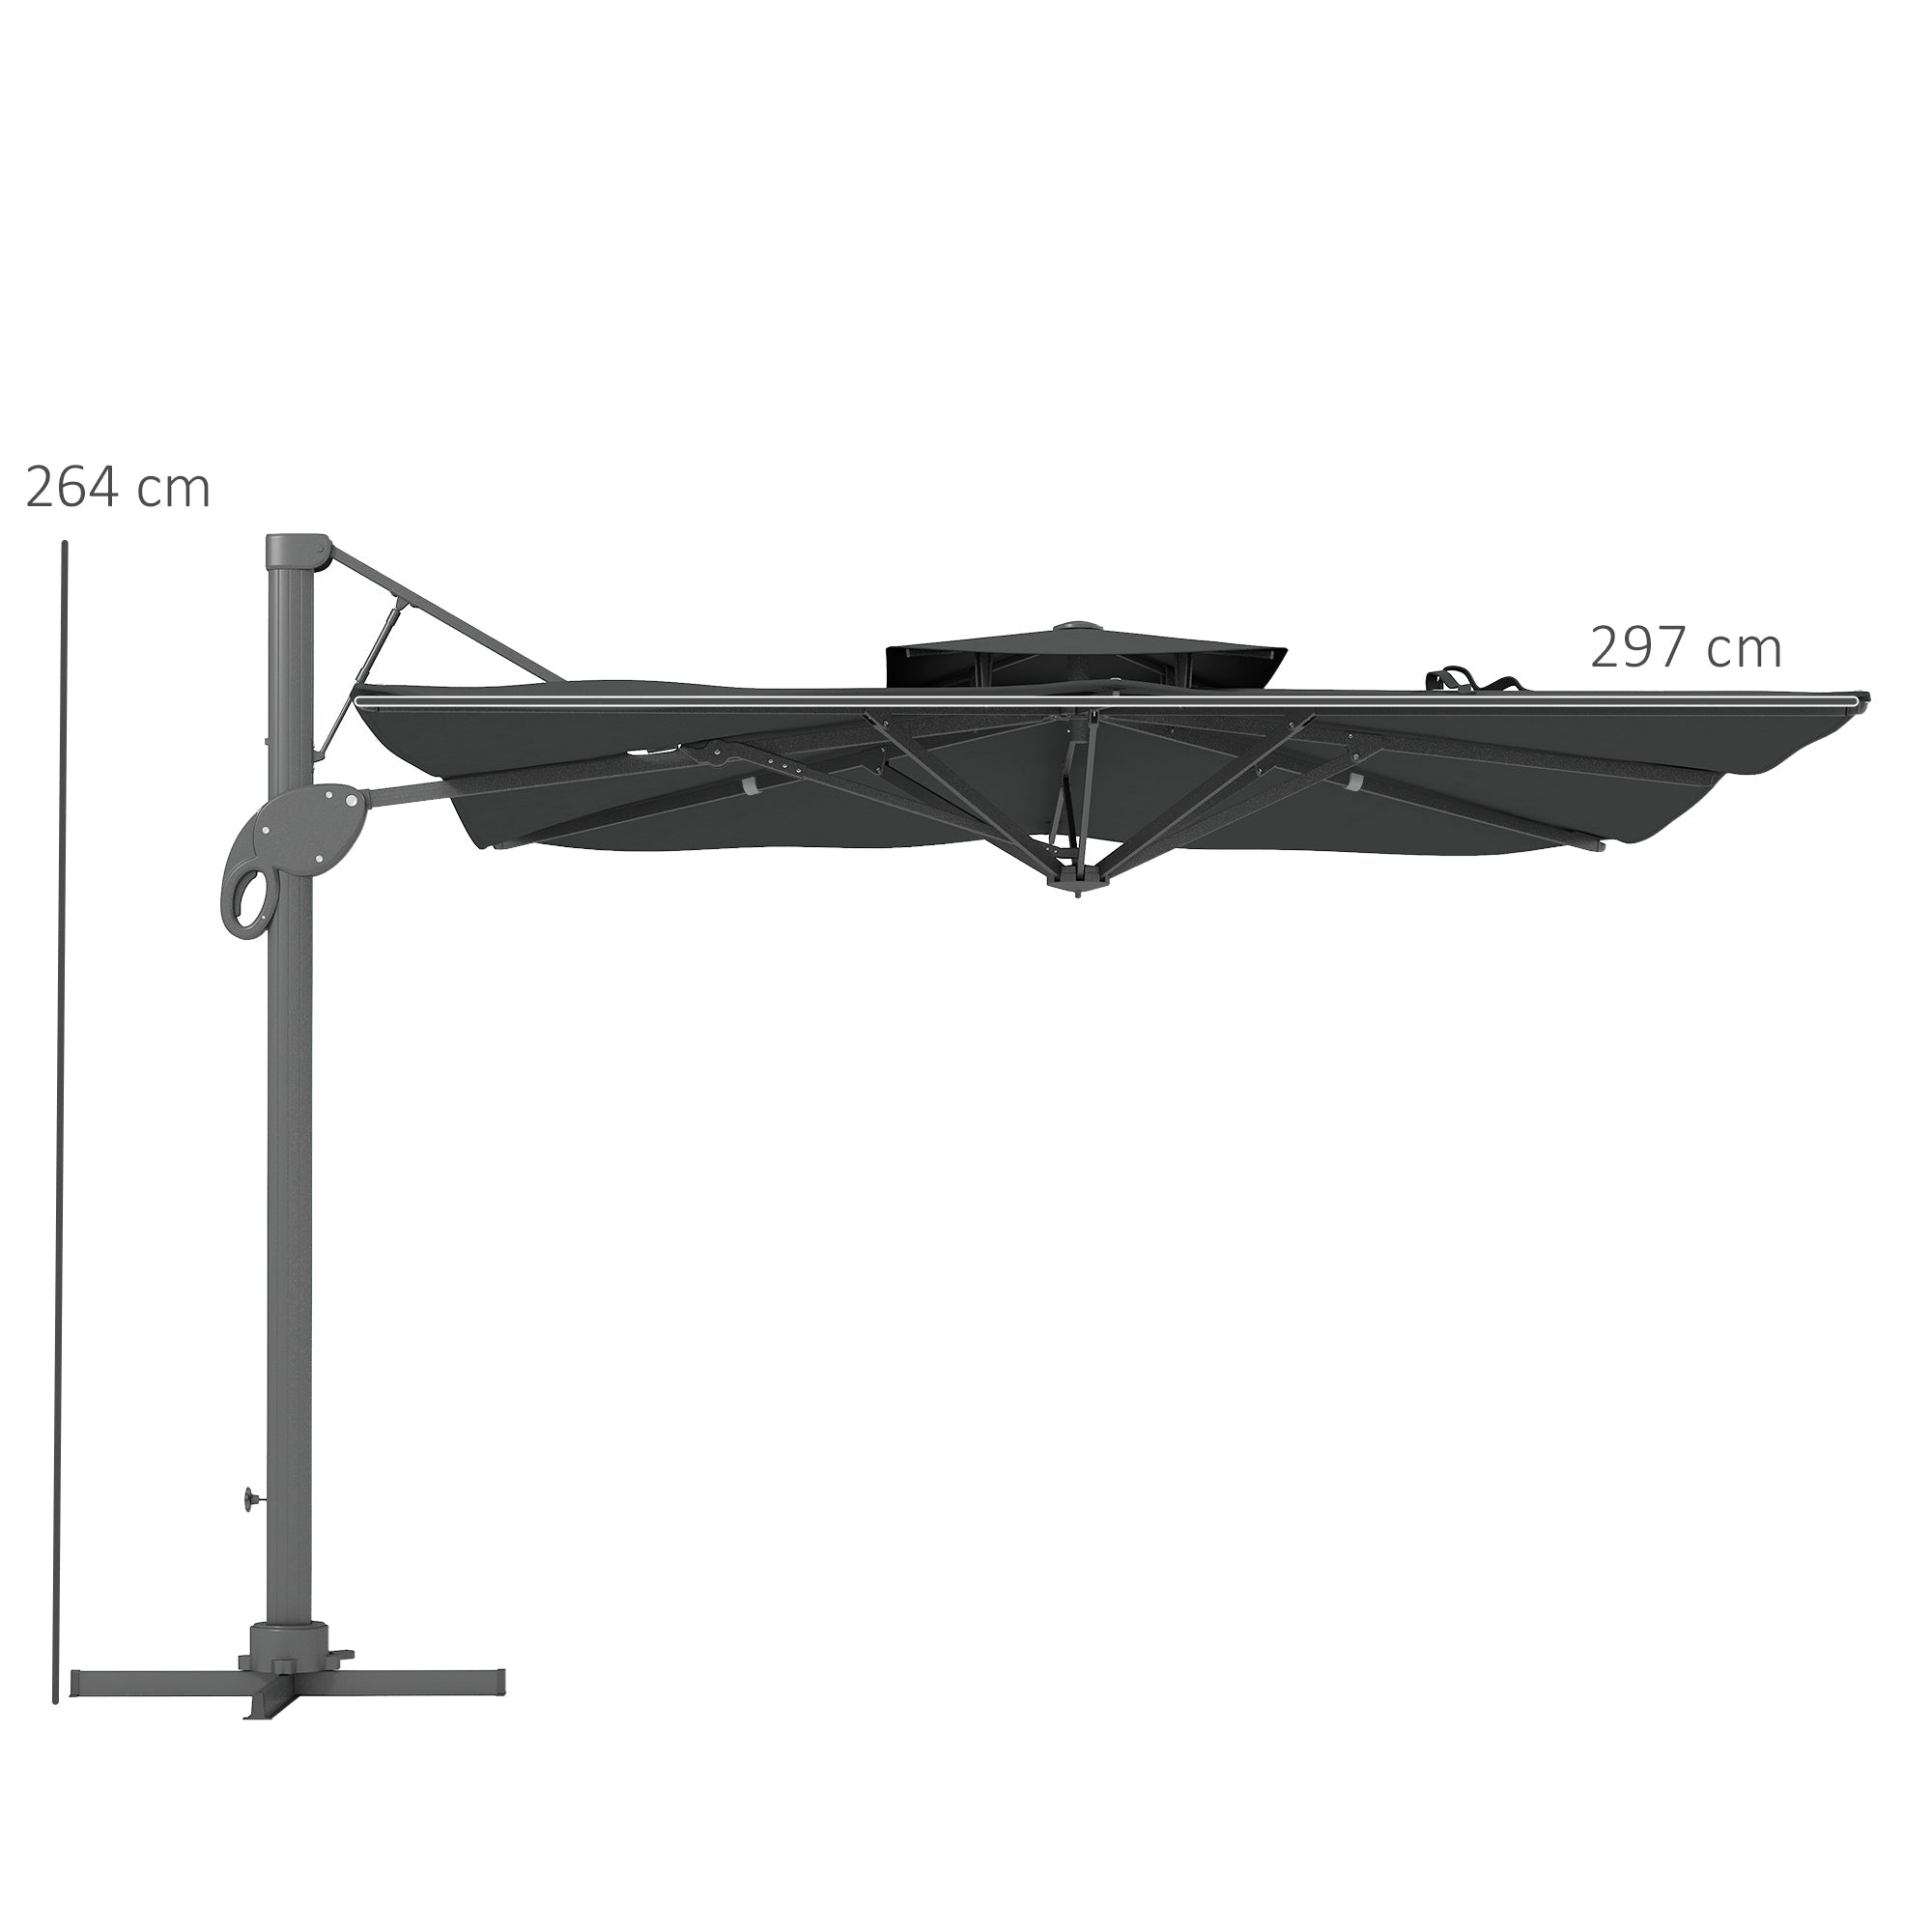 Garden Parasol, 3(m) Cantilever Parasol with Hydraulic Mechanism, Dual Vented Top, 8 Ribs, Cross Base, Grey-2